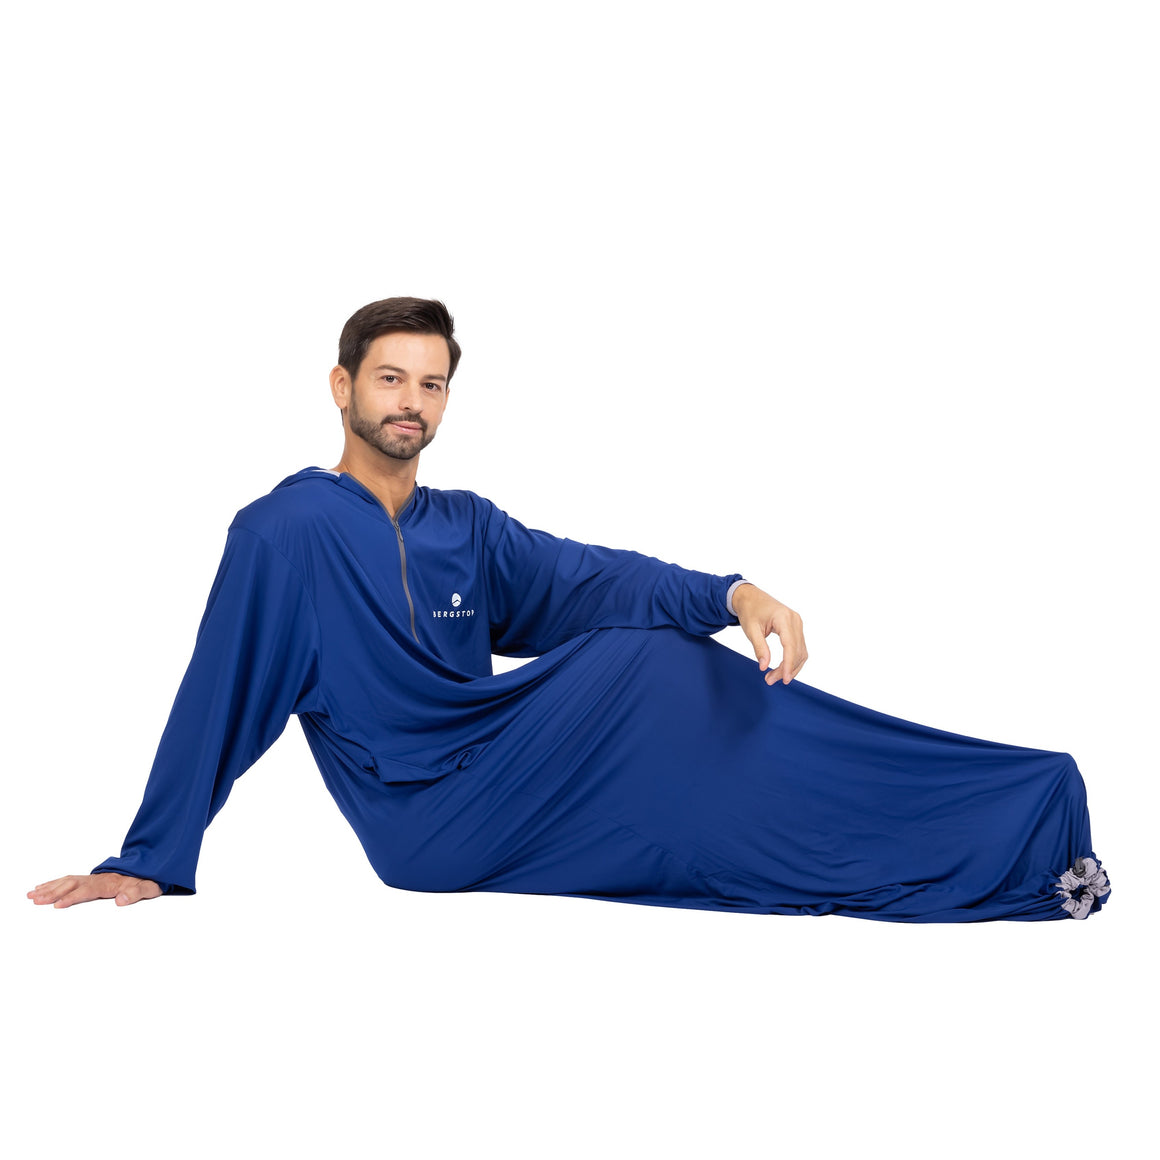 MicroStretch Liner - comfortable indoor sleeping bag with arms